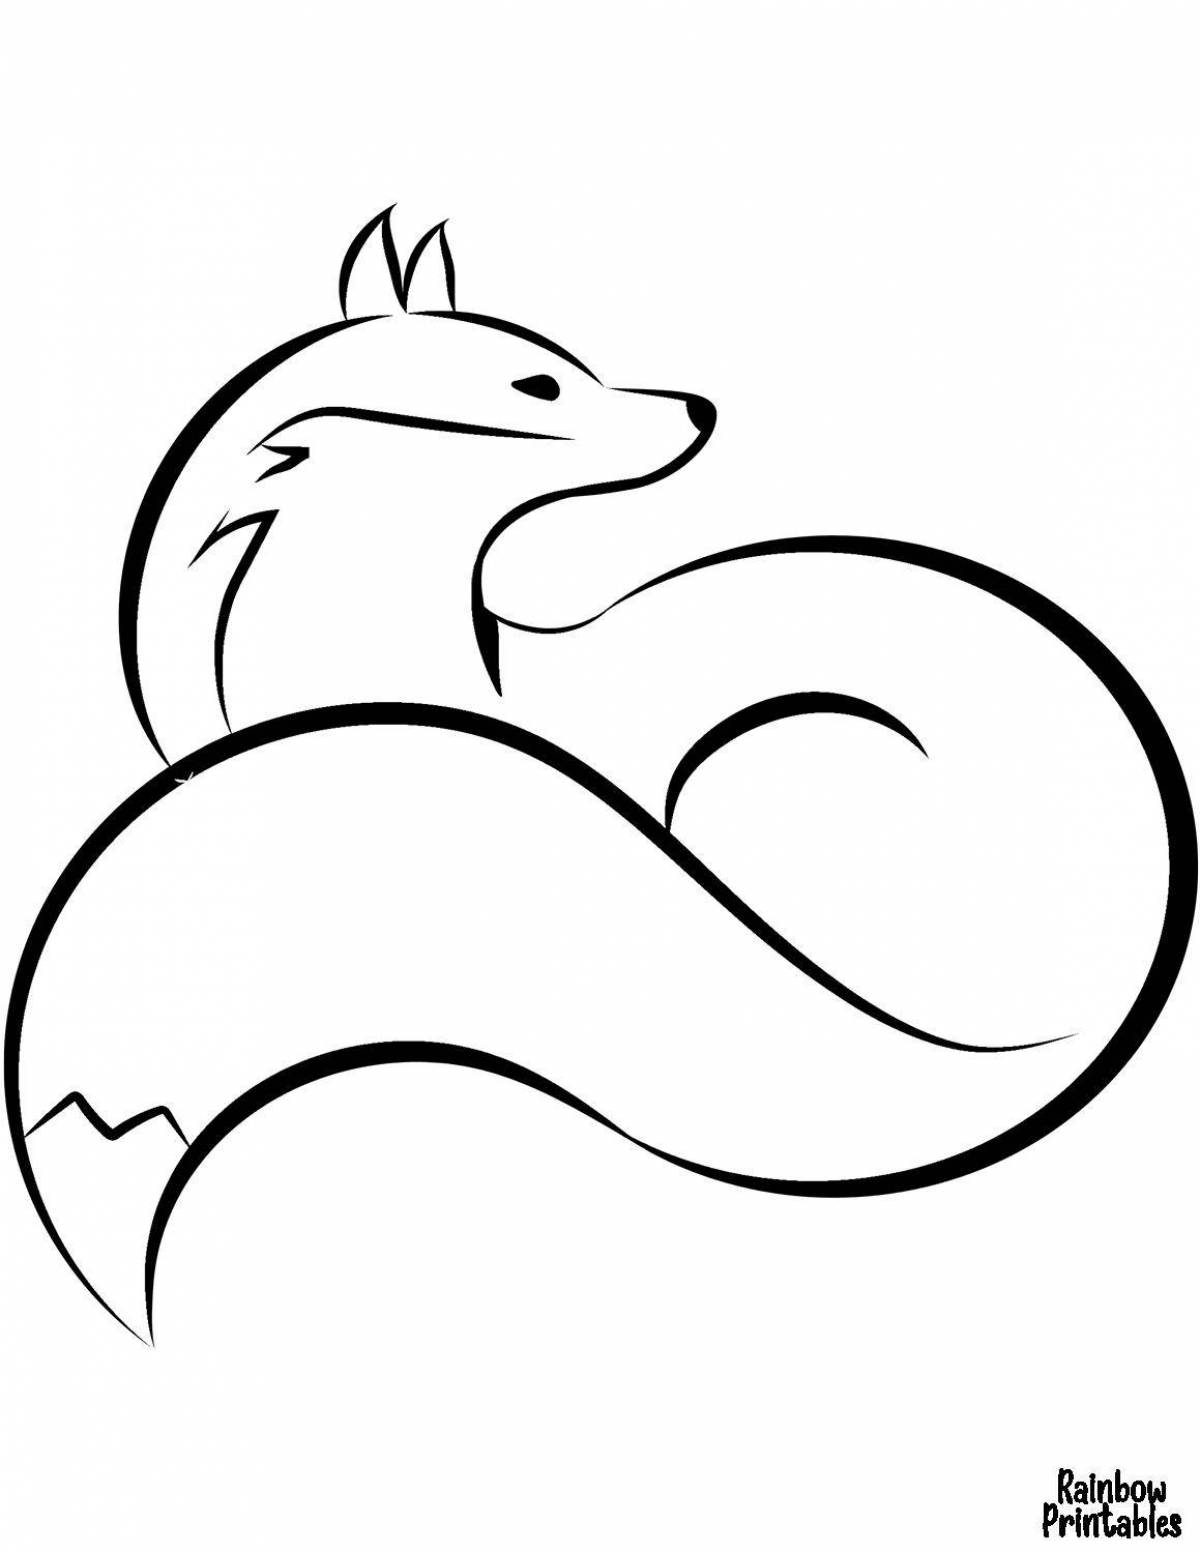 Adorable fox tail coloring page